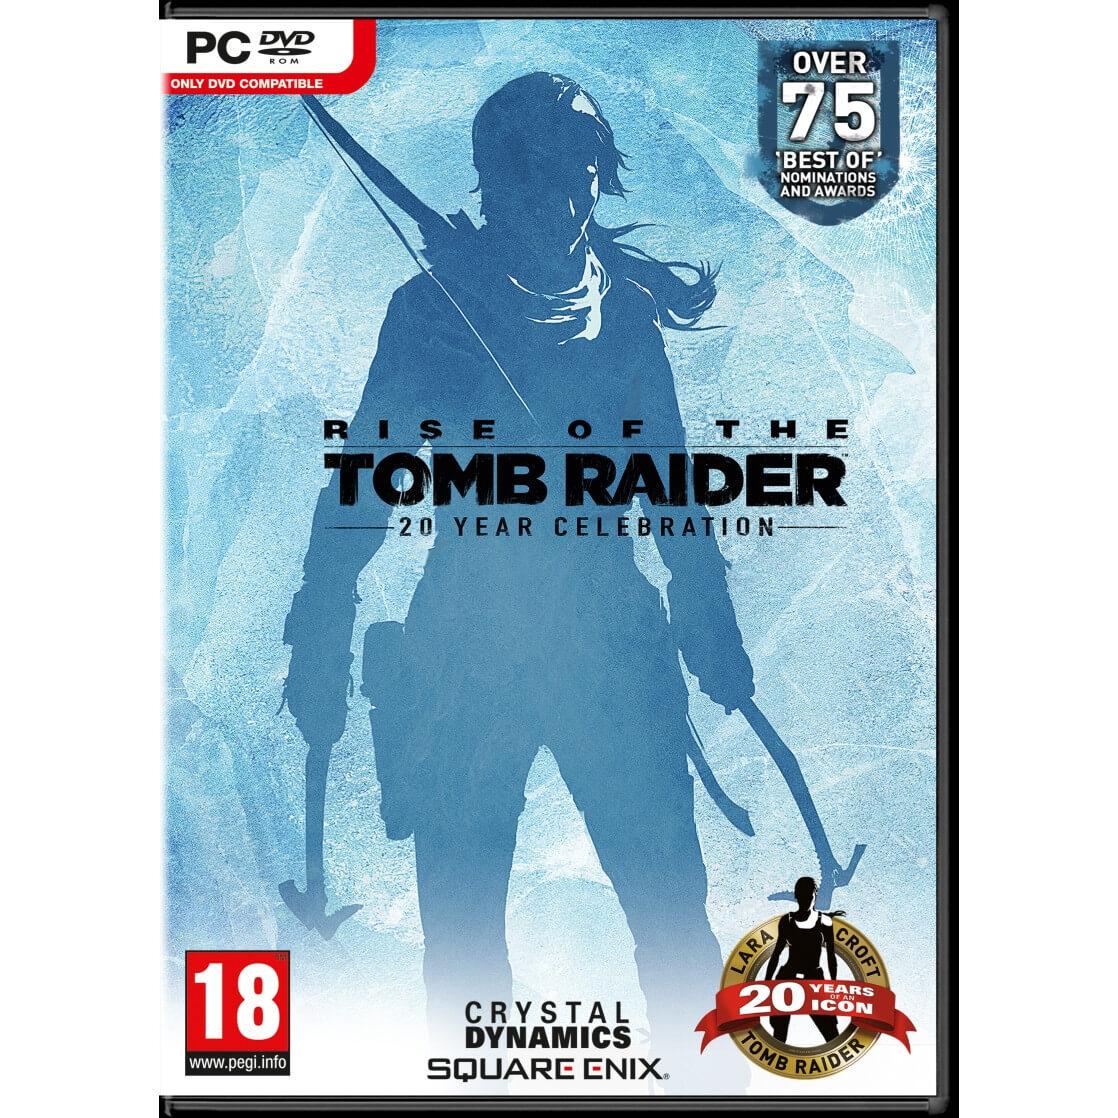 what week of the year is it Joc PC Rise of the Tomb Raider: 20 Year Celebration